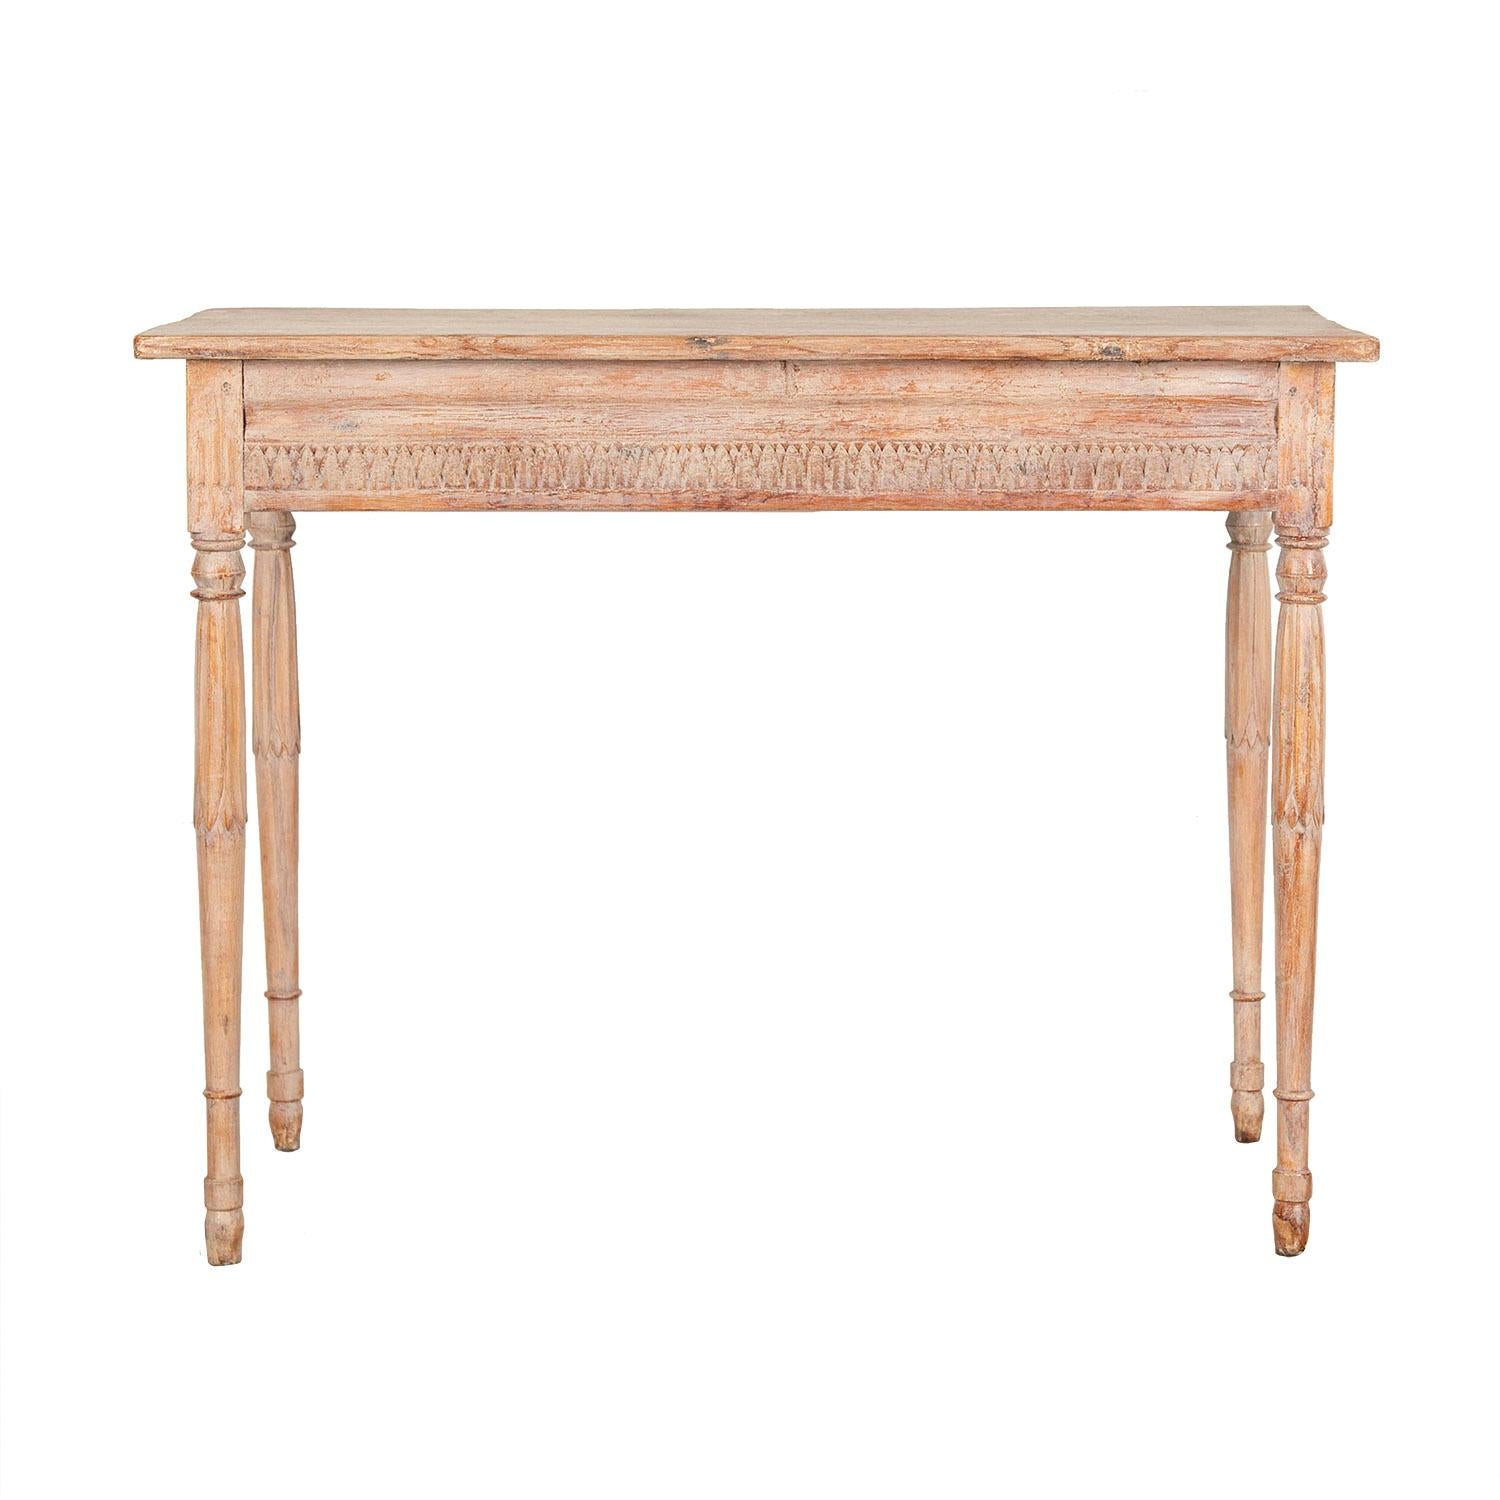 19th century Swedish table with four turned legs with leaf decoration. This piece features decorative carving around the table on all four sides, and original paint. This table could free stand.